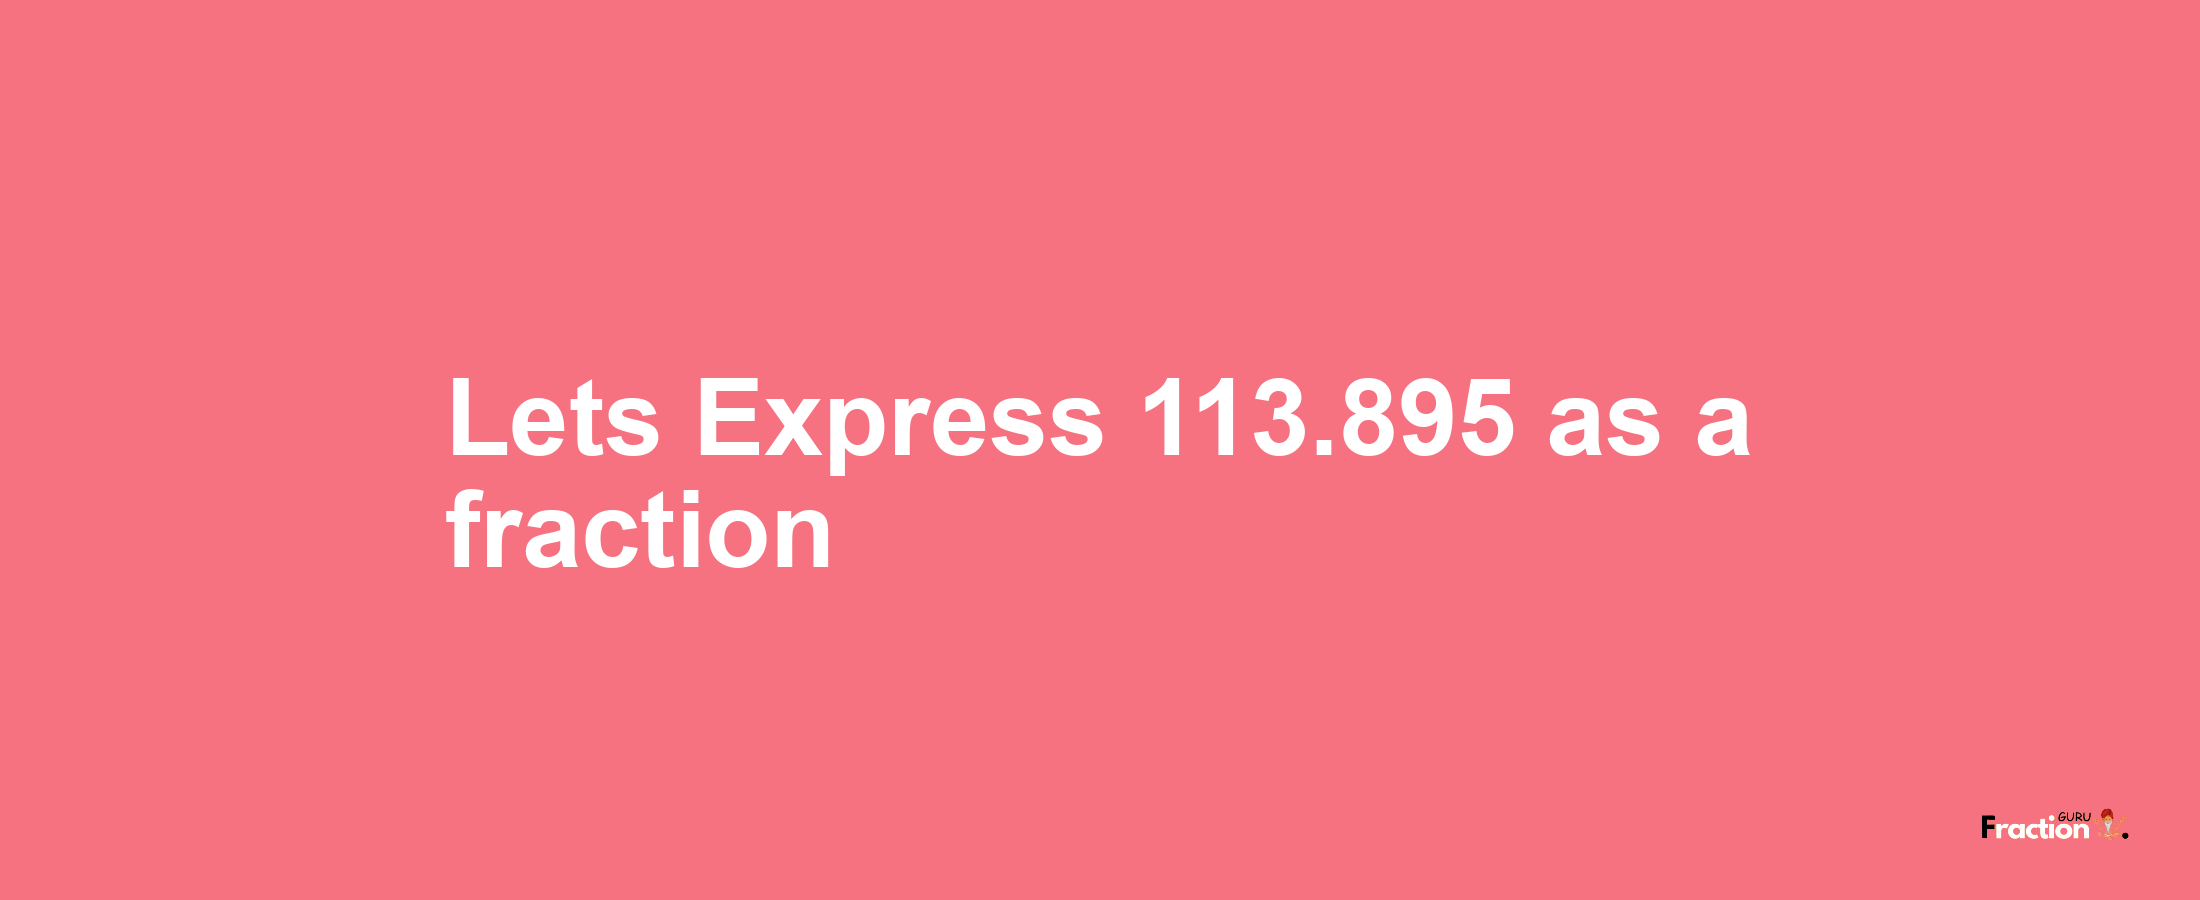 Lets Express 113.895 as afraction